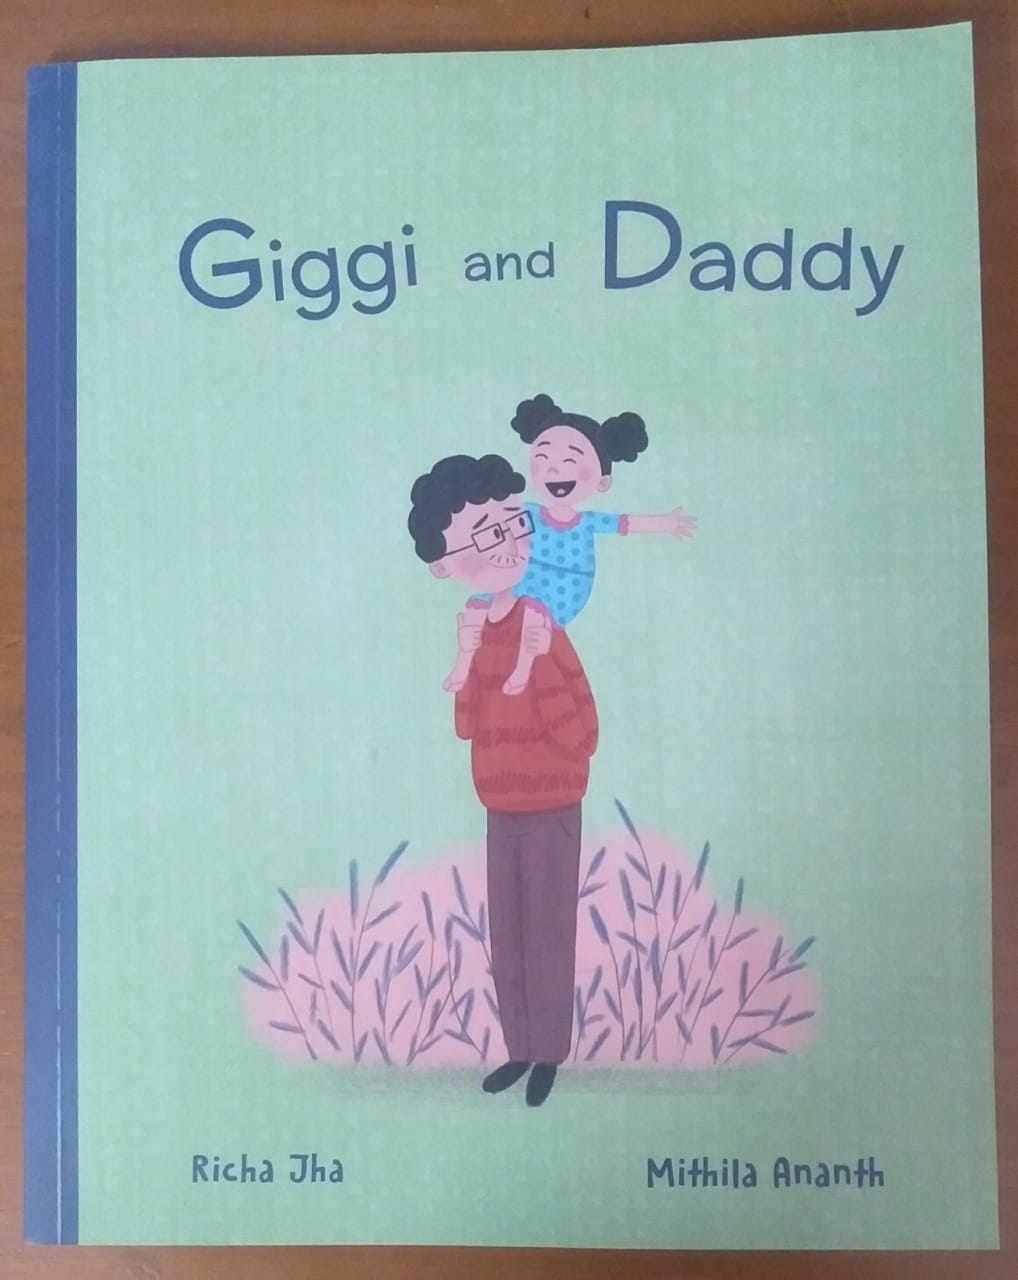 Review: Giggi and Daddy